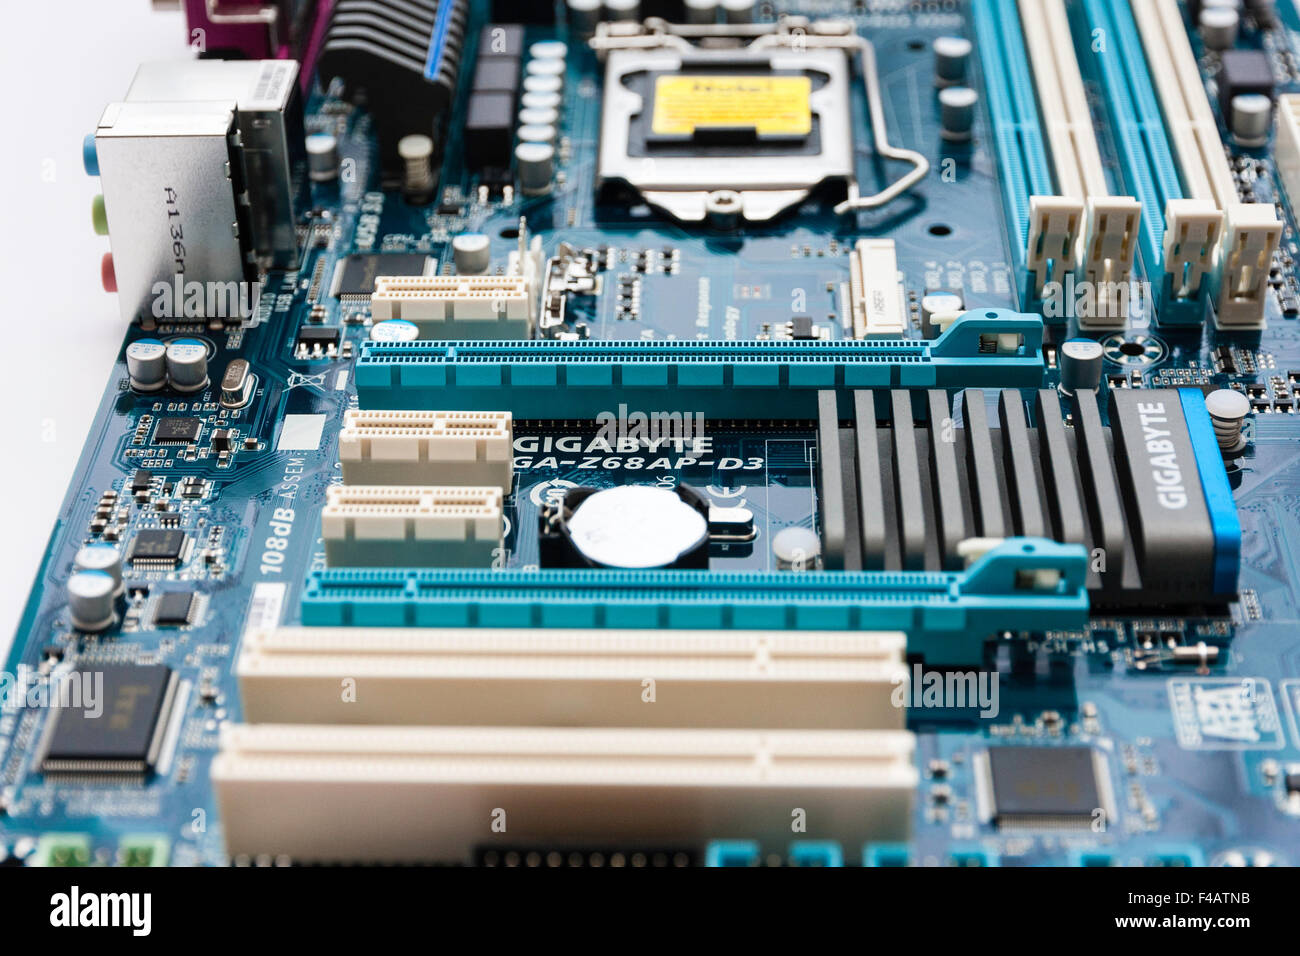 Computer motherboard showing PCI expansion slots, top of closed chip  socket, Ram slots for memory and Gigabyte processor Stock Photo - Alamy